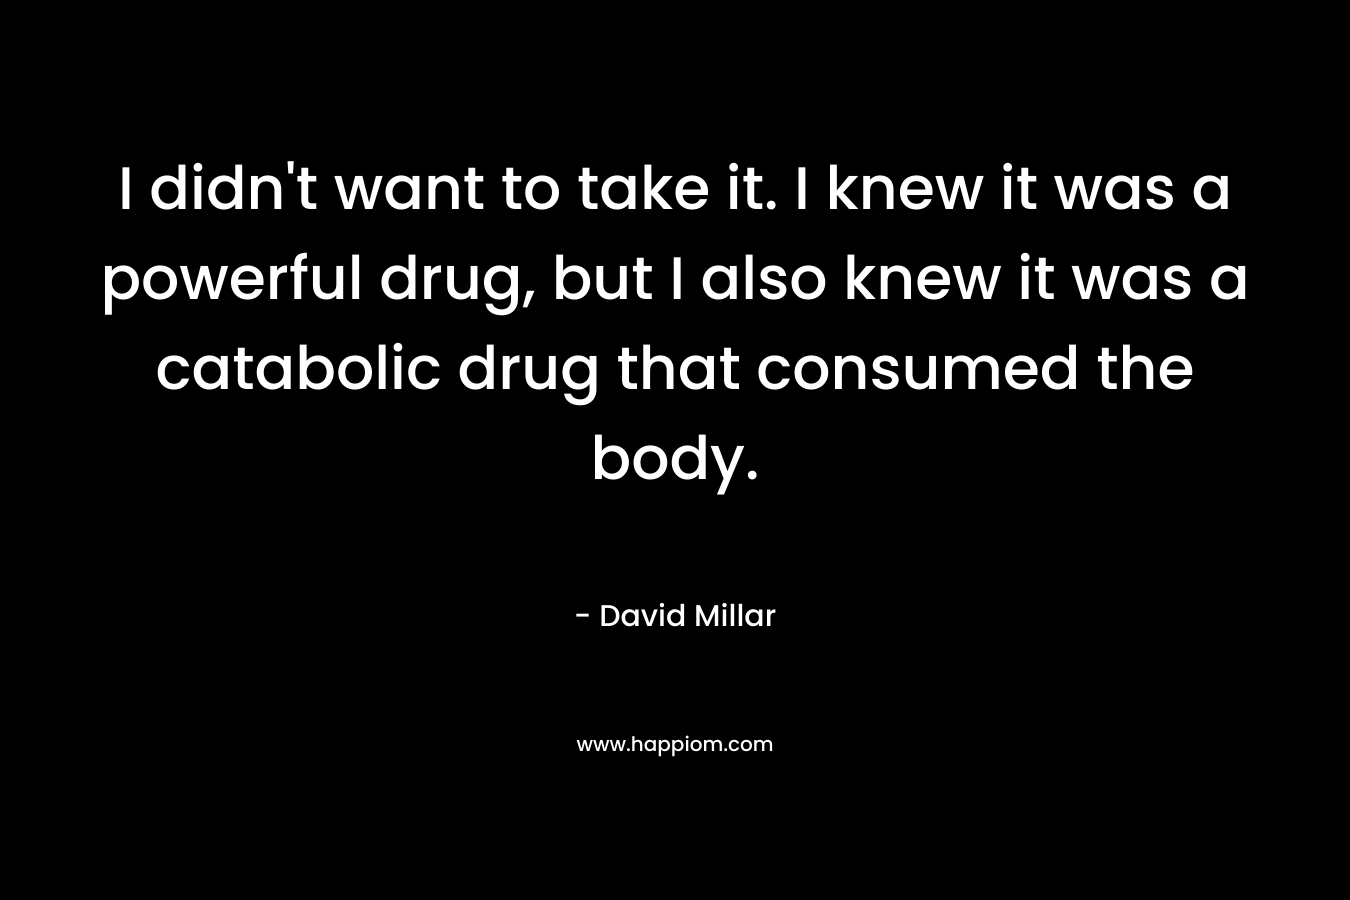 I didn’t want to take it. I knew it was a powerful drug, but I also knew it was a catabolic drug that consumed the body. – David Millar